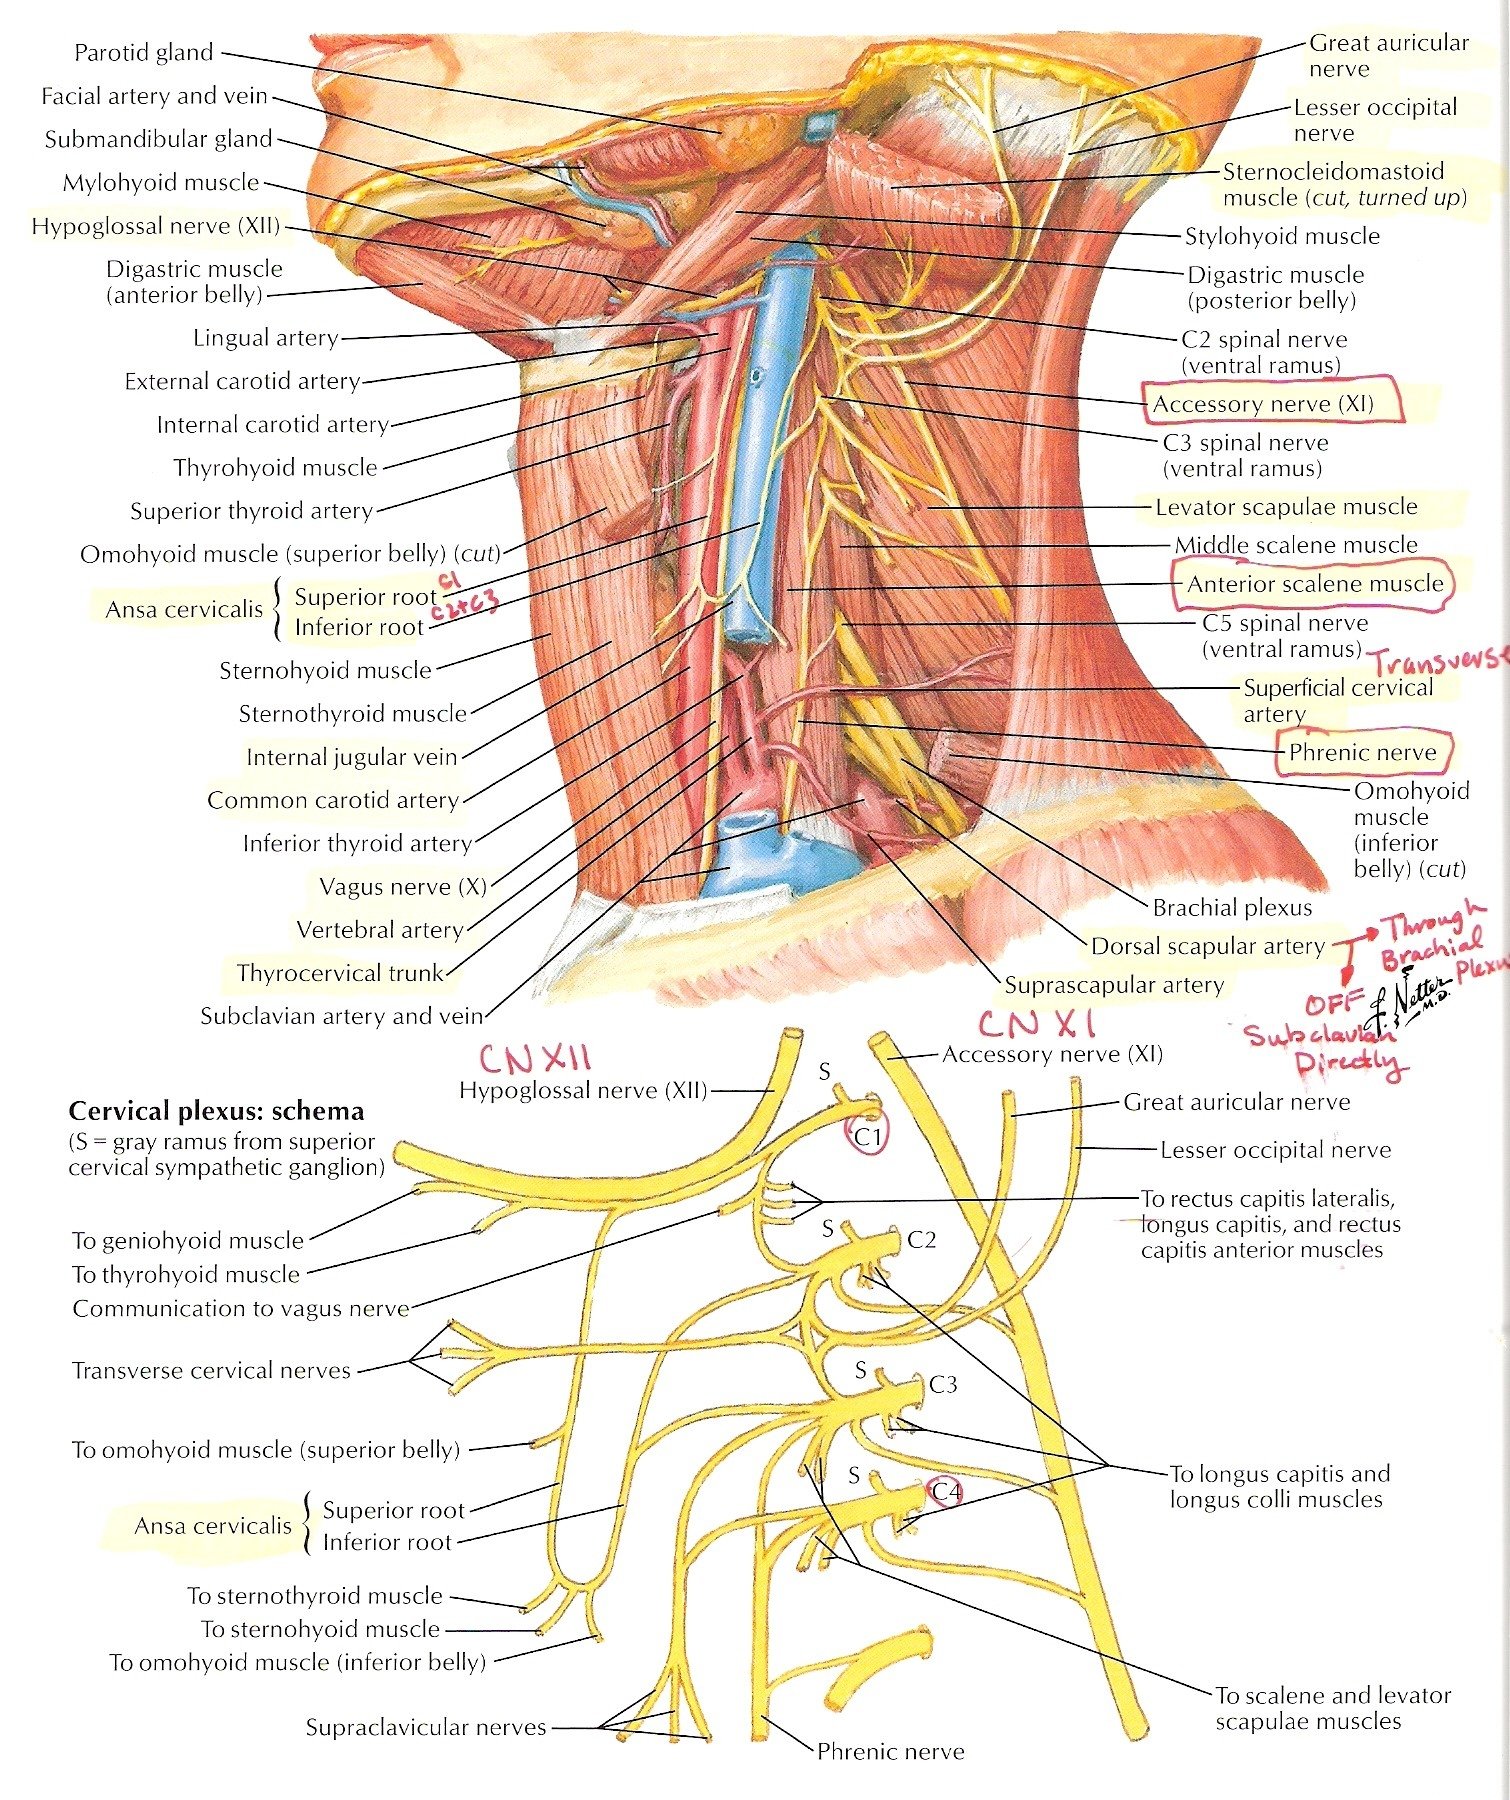 Functions Nerve Supply of Teres Major Muscle